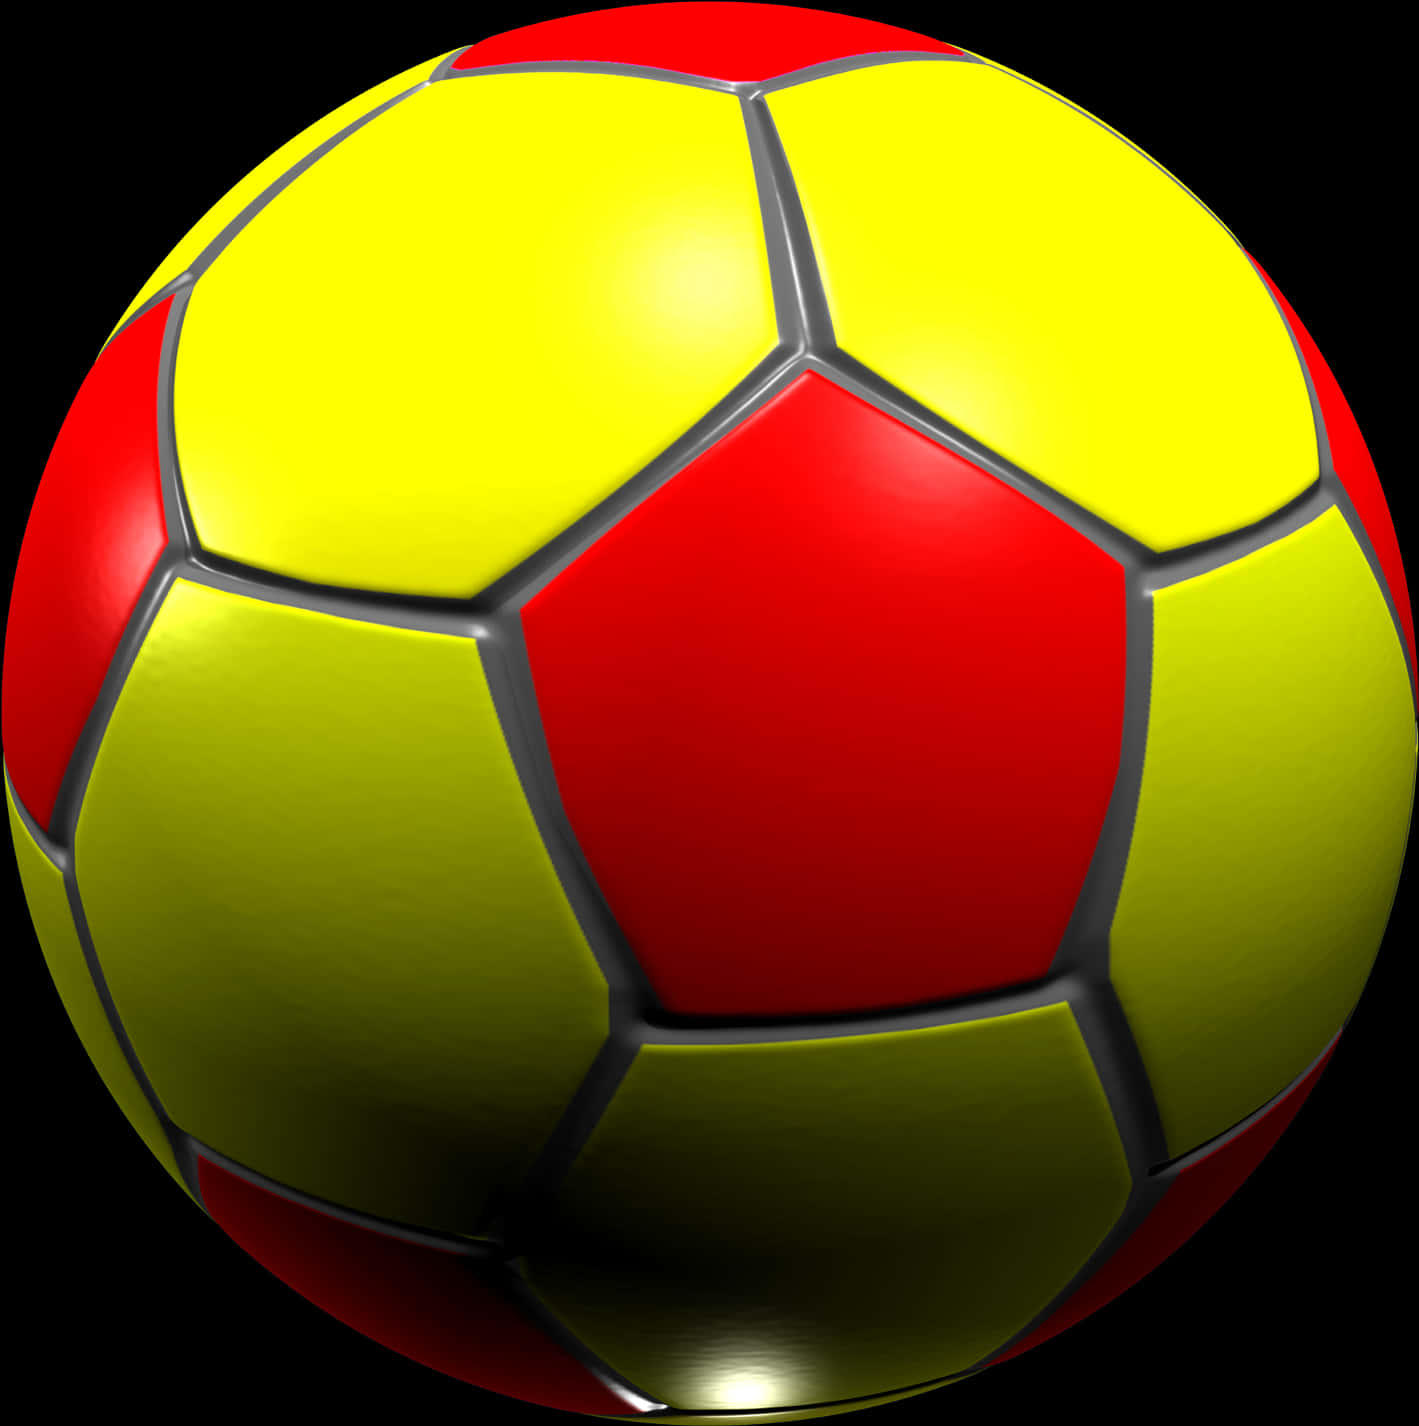 Vibrant Redand Yellow Soccer Ball PNG